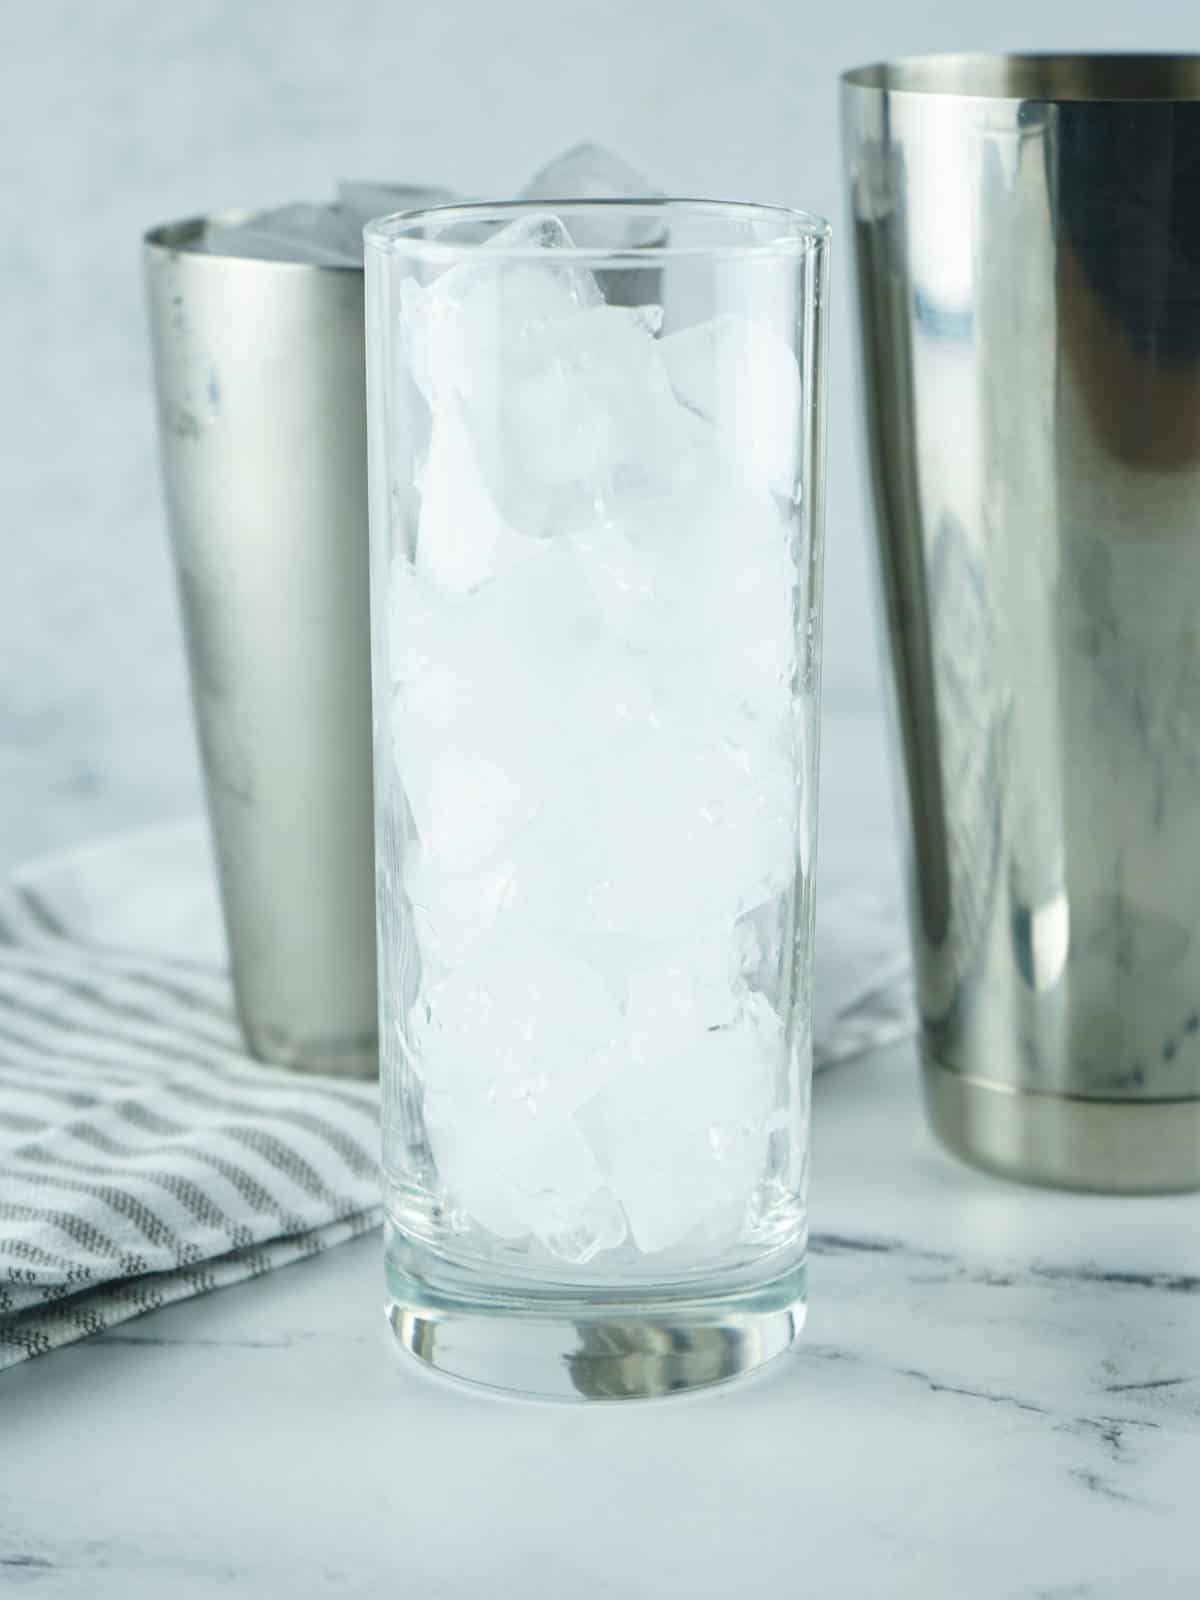 filling a glass with ice.